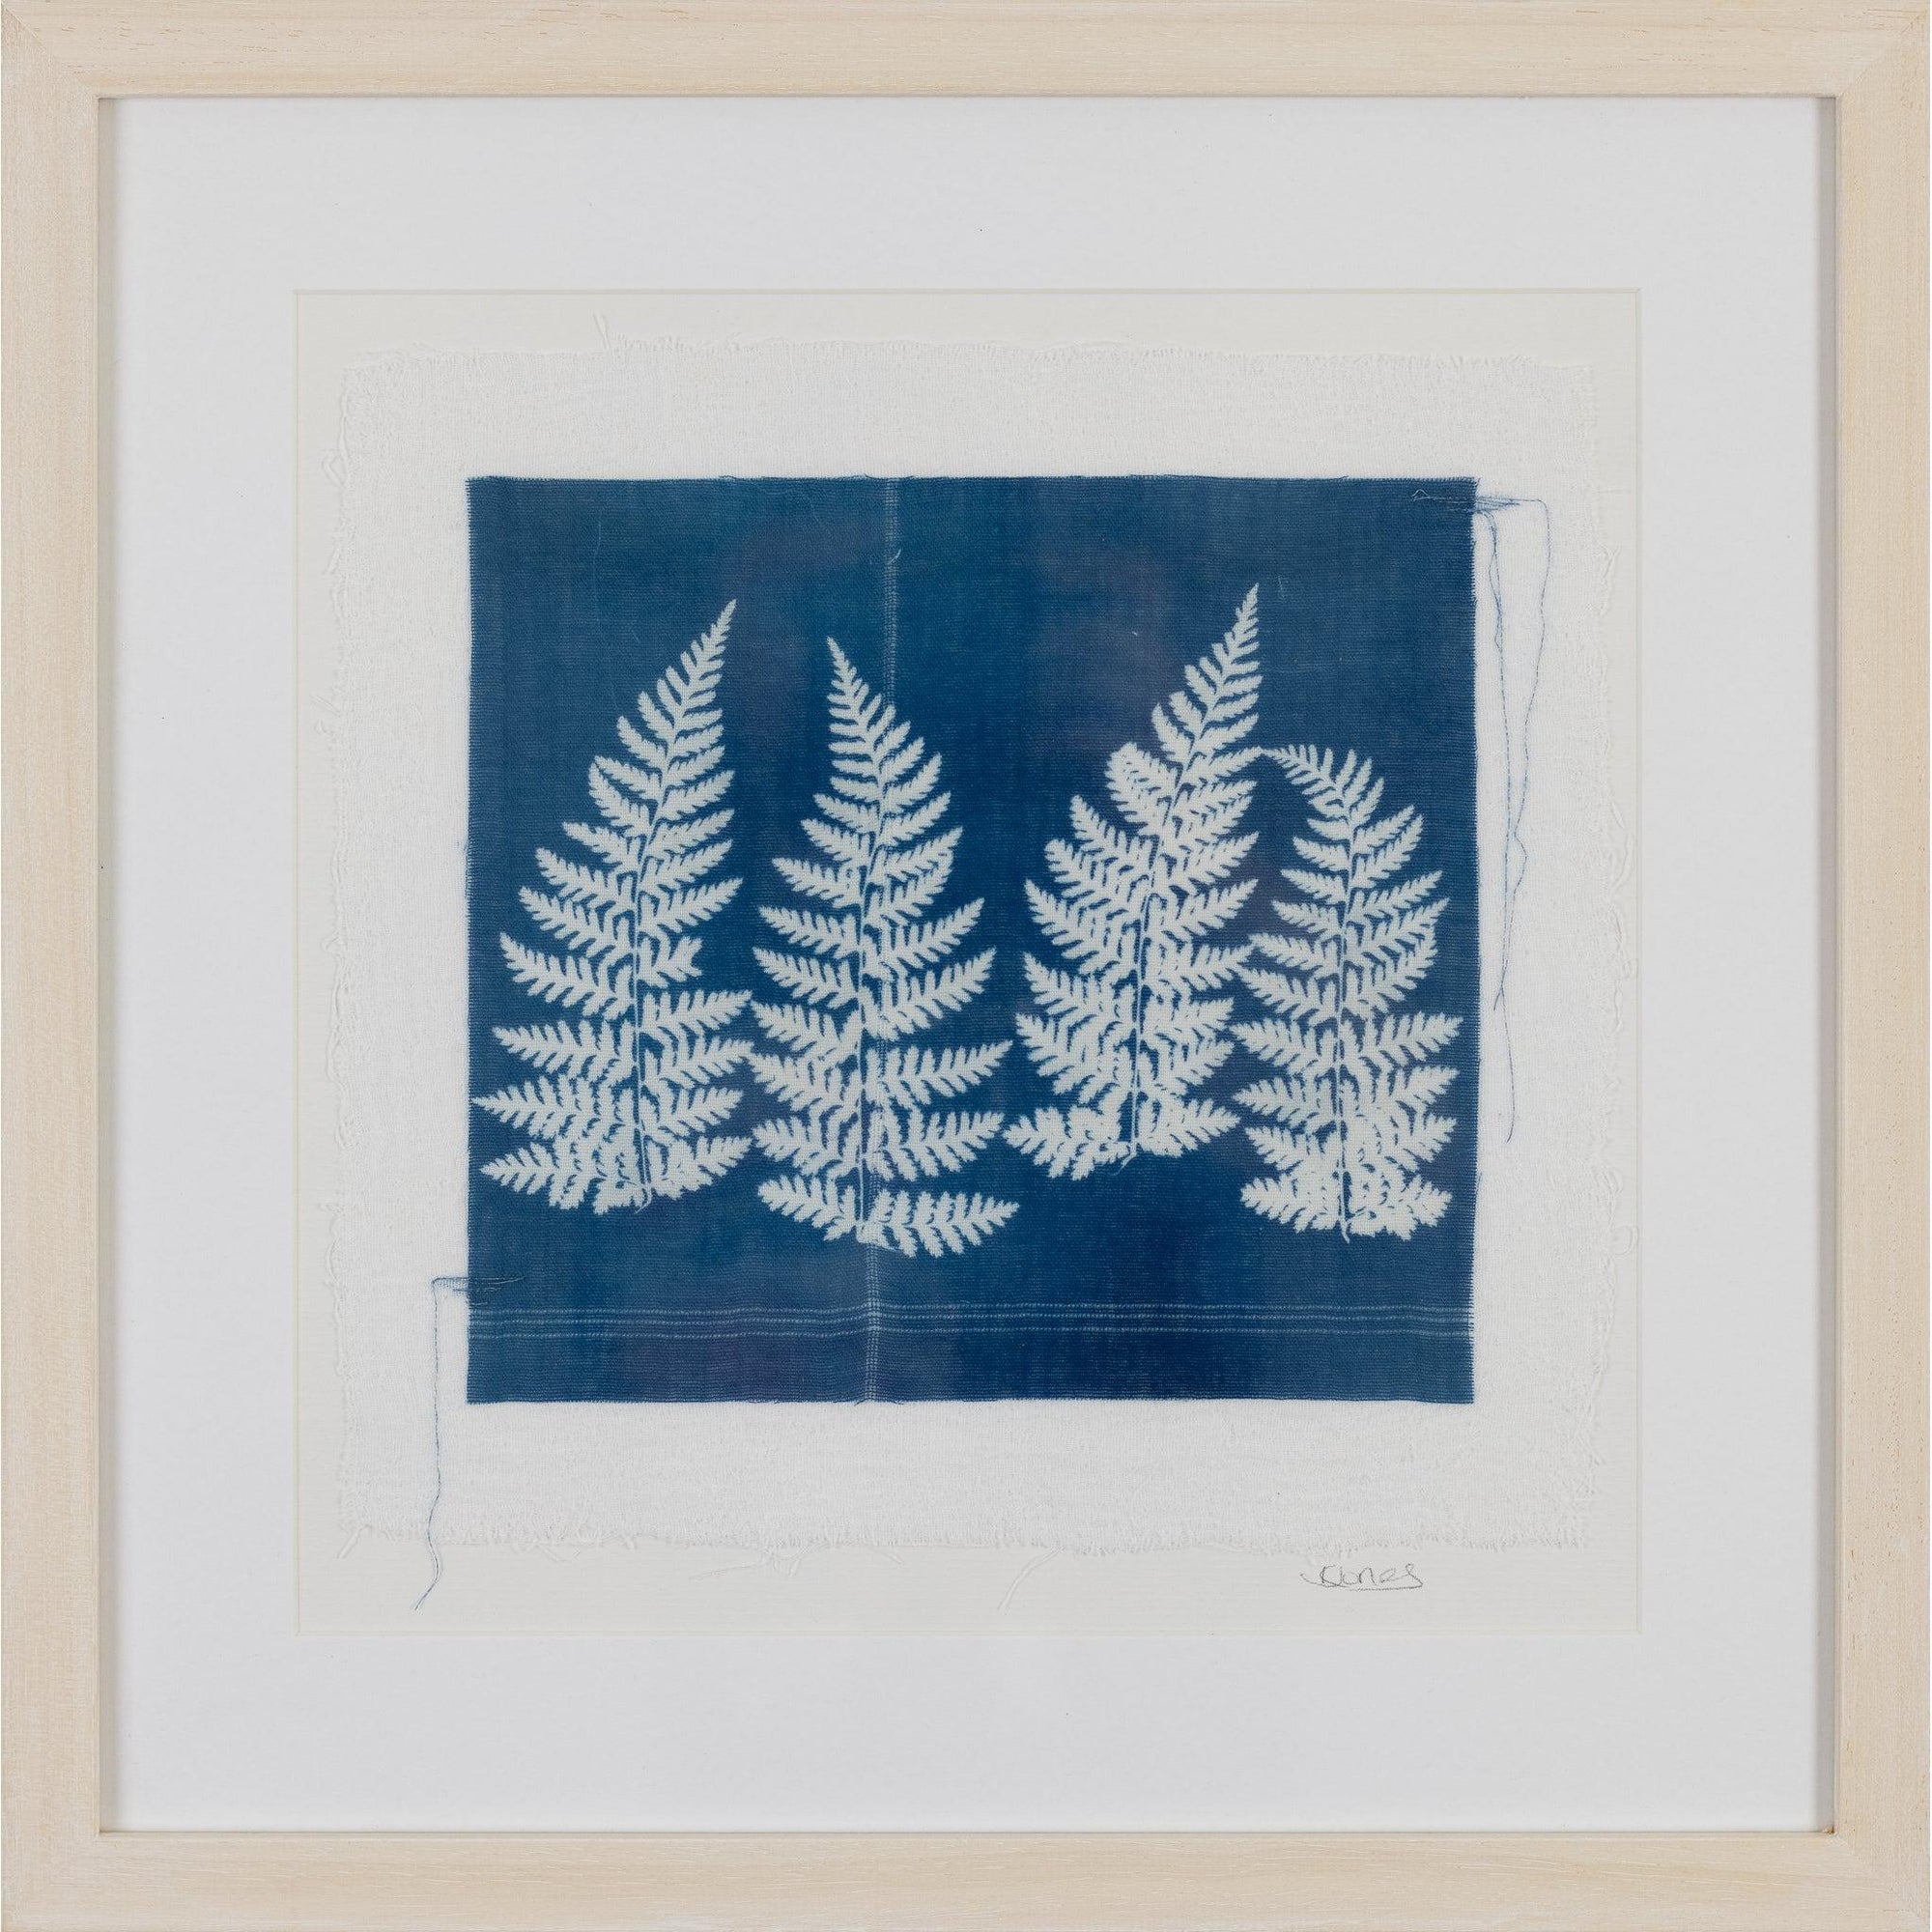 'Ferns' Cyanotype by Karen Jones, available at Padstow Gallery, Cornwall